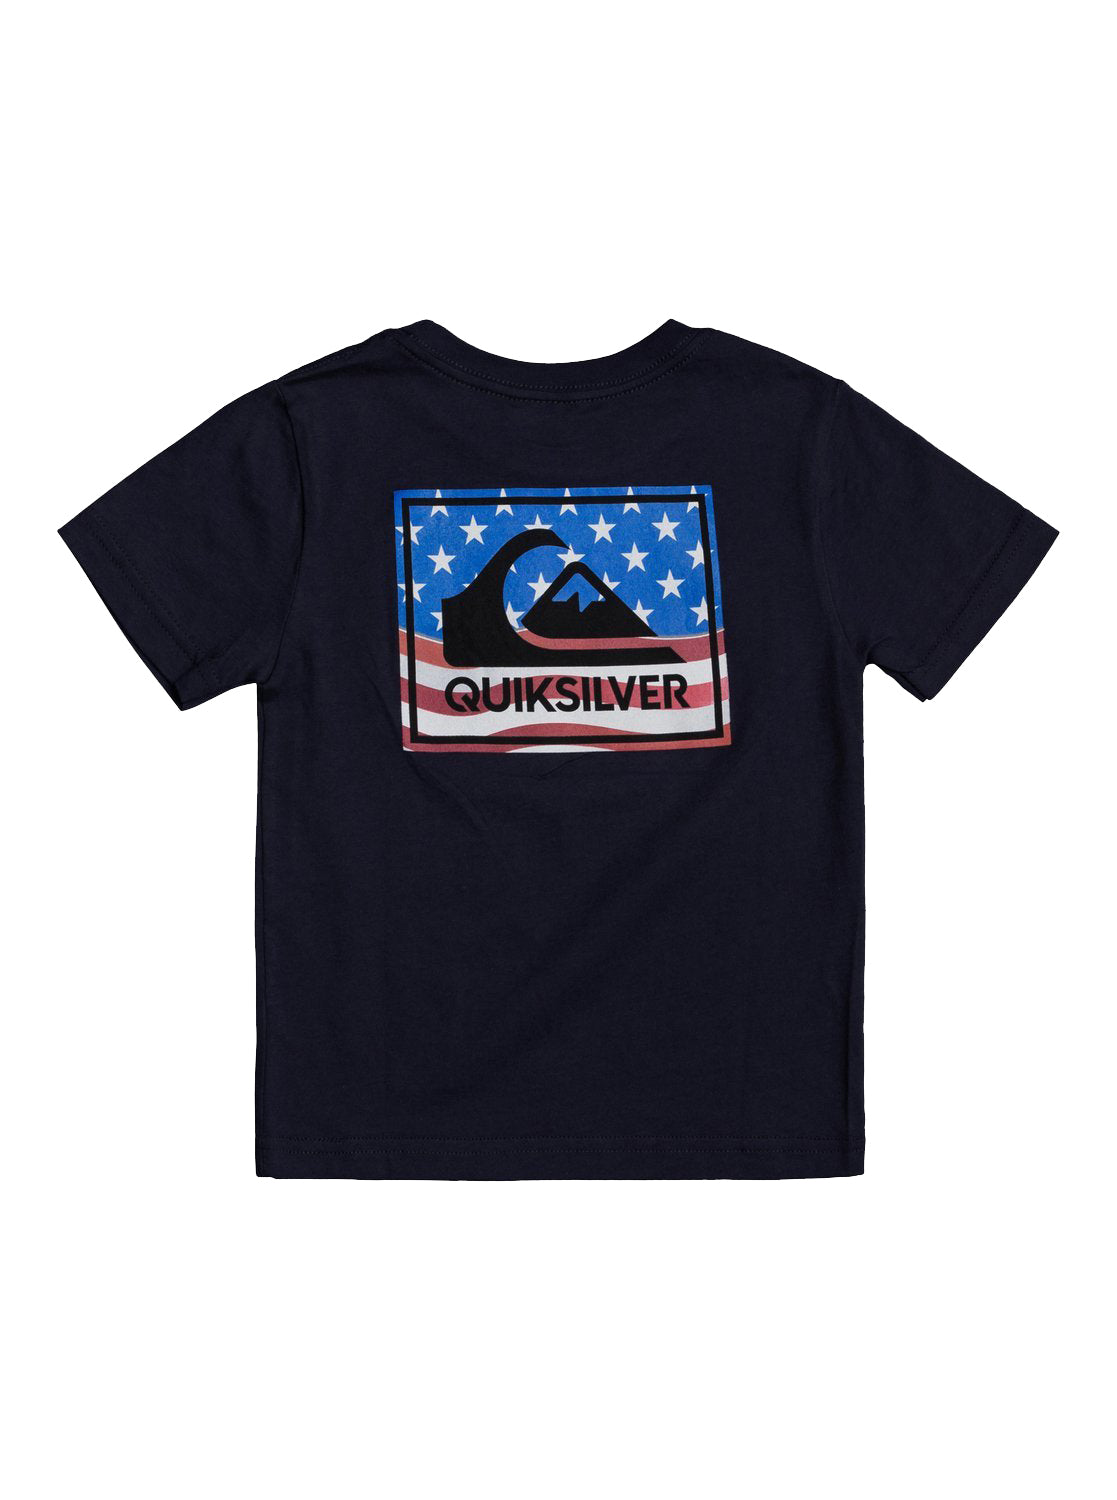 Quiksilver Architexure Youth Tee BYJ0 4